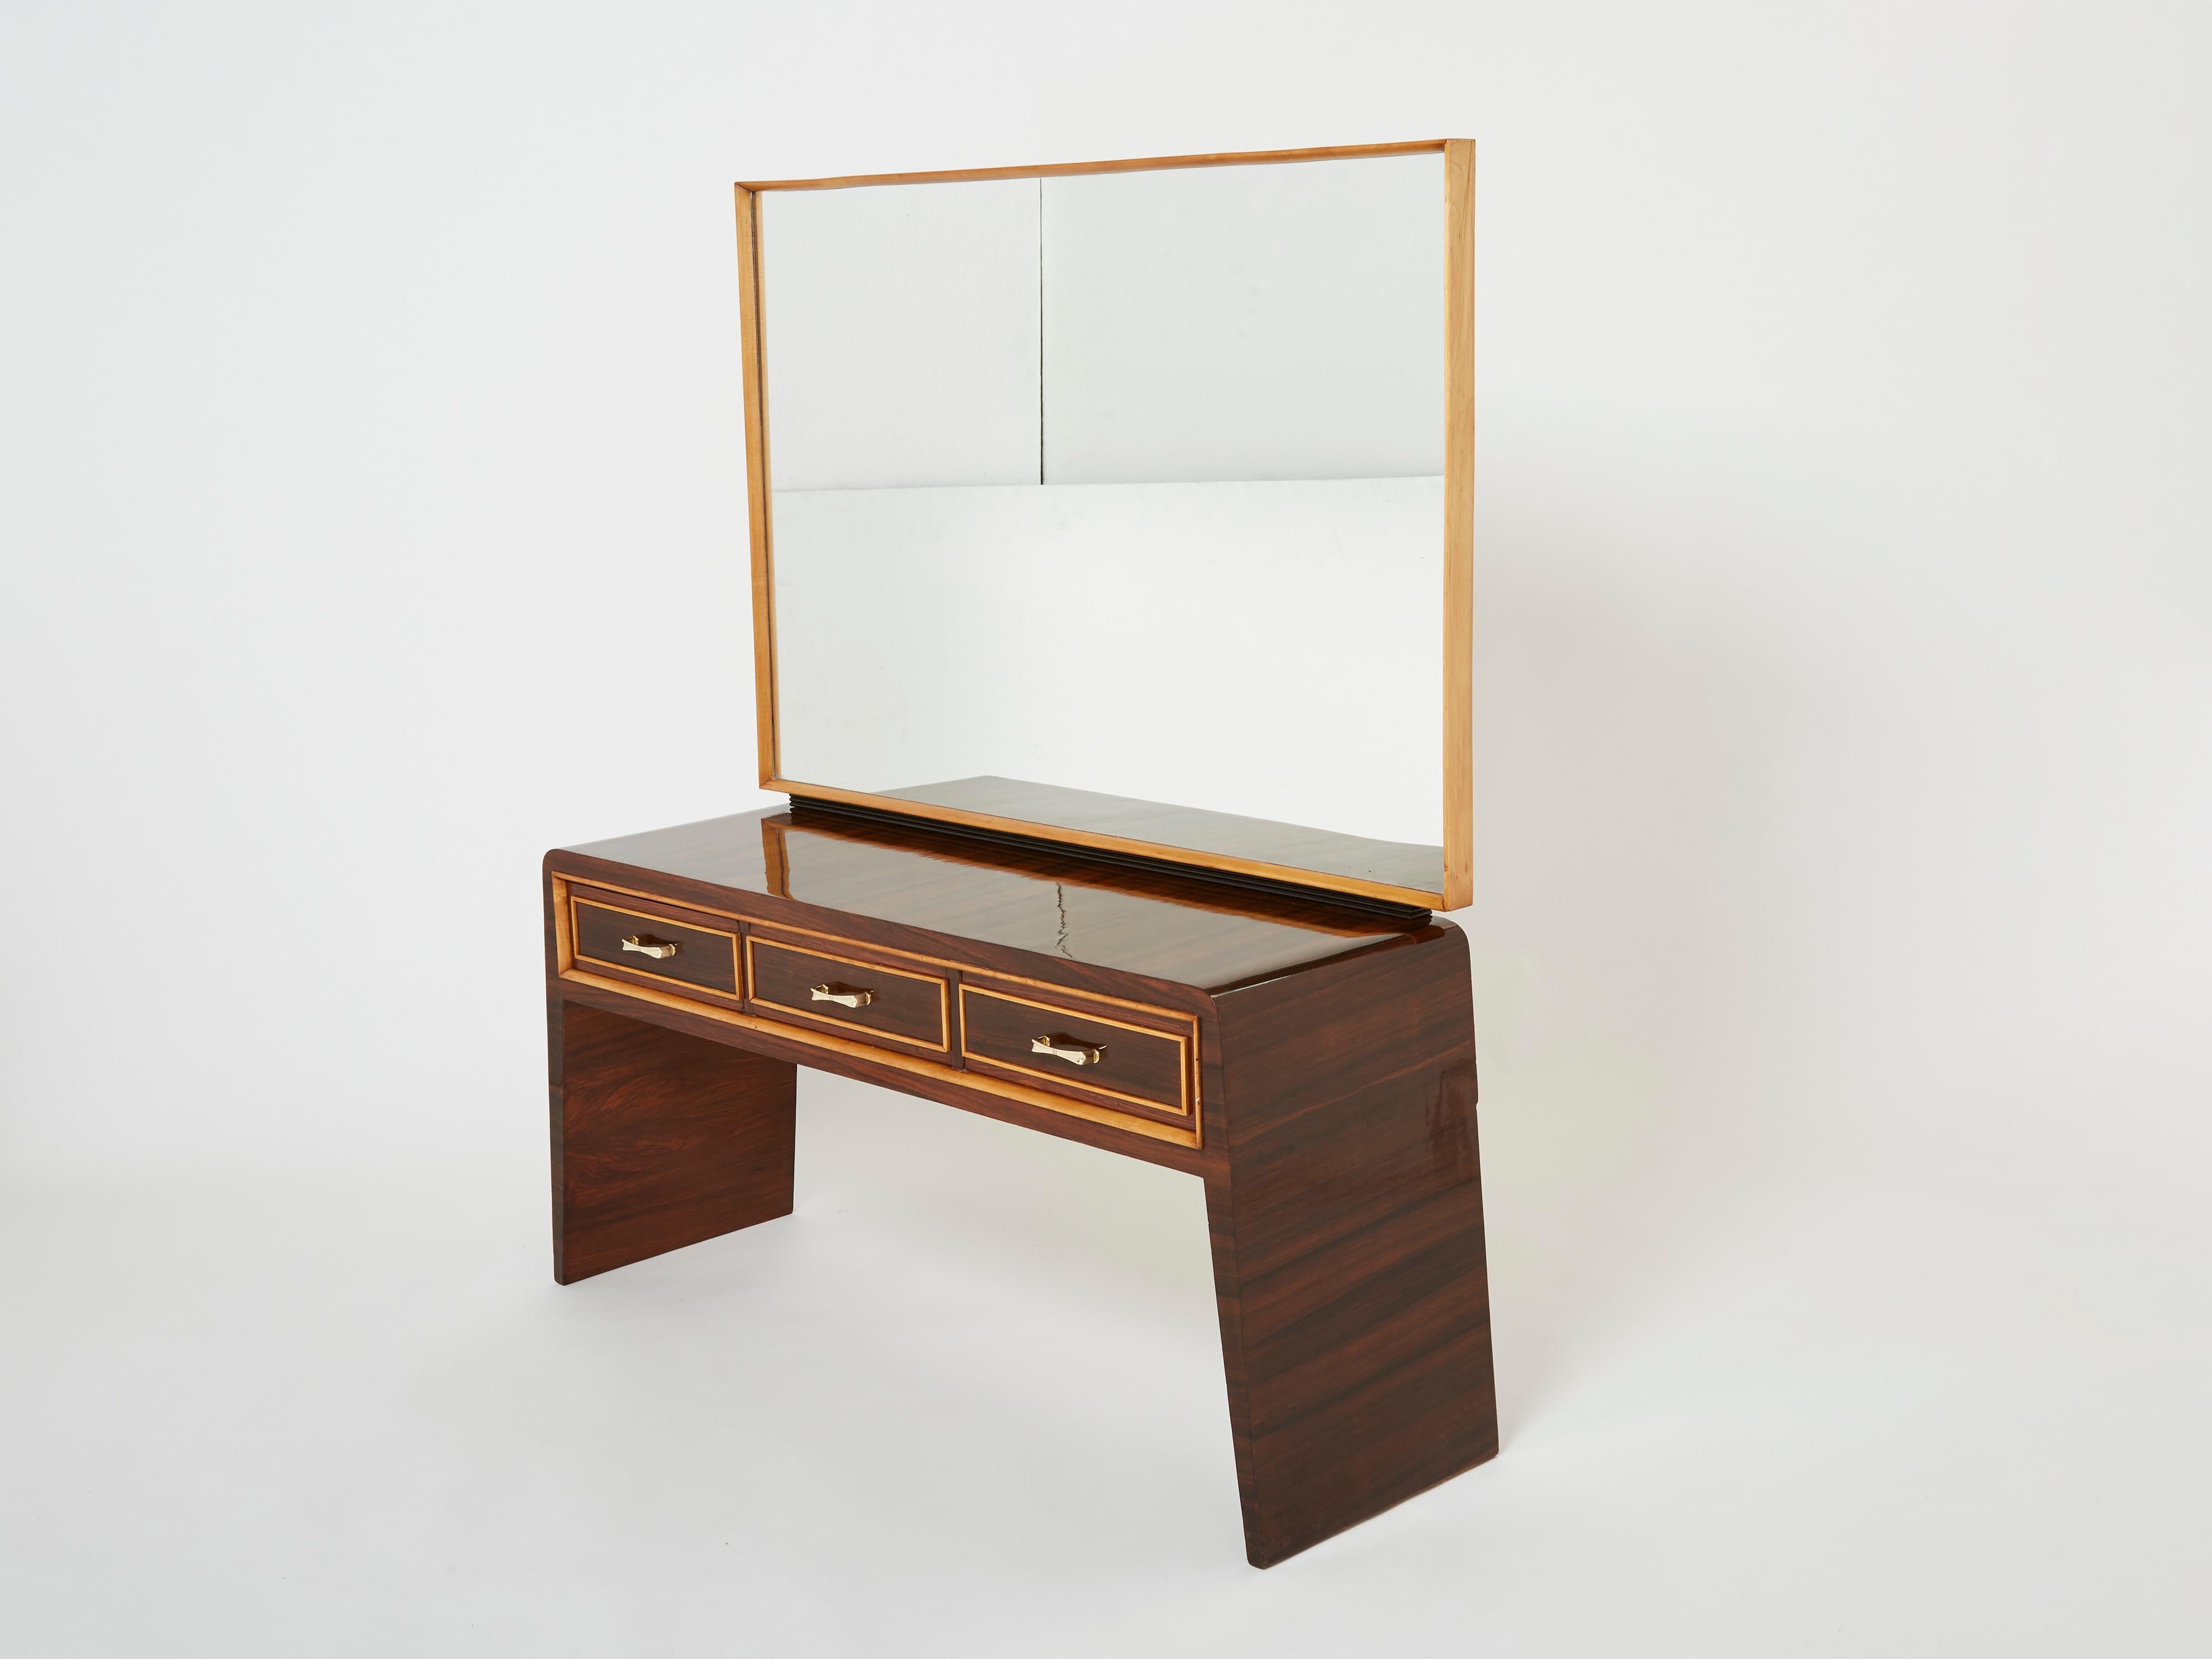 This rare and beautiful vanity designed by Paolo Buffa in Italy in the 1940s imparts a cosy, chic and glowing mood to a space. The warm rosewood remains looking beautiful and smooth eighty plus years later. Elegantly shaped, seating on two curved